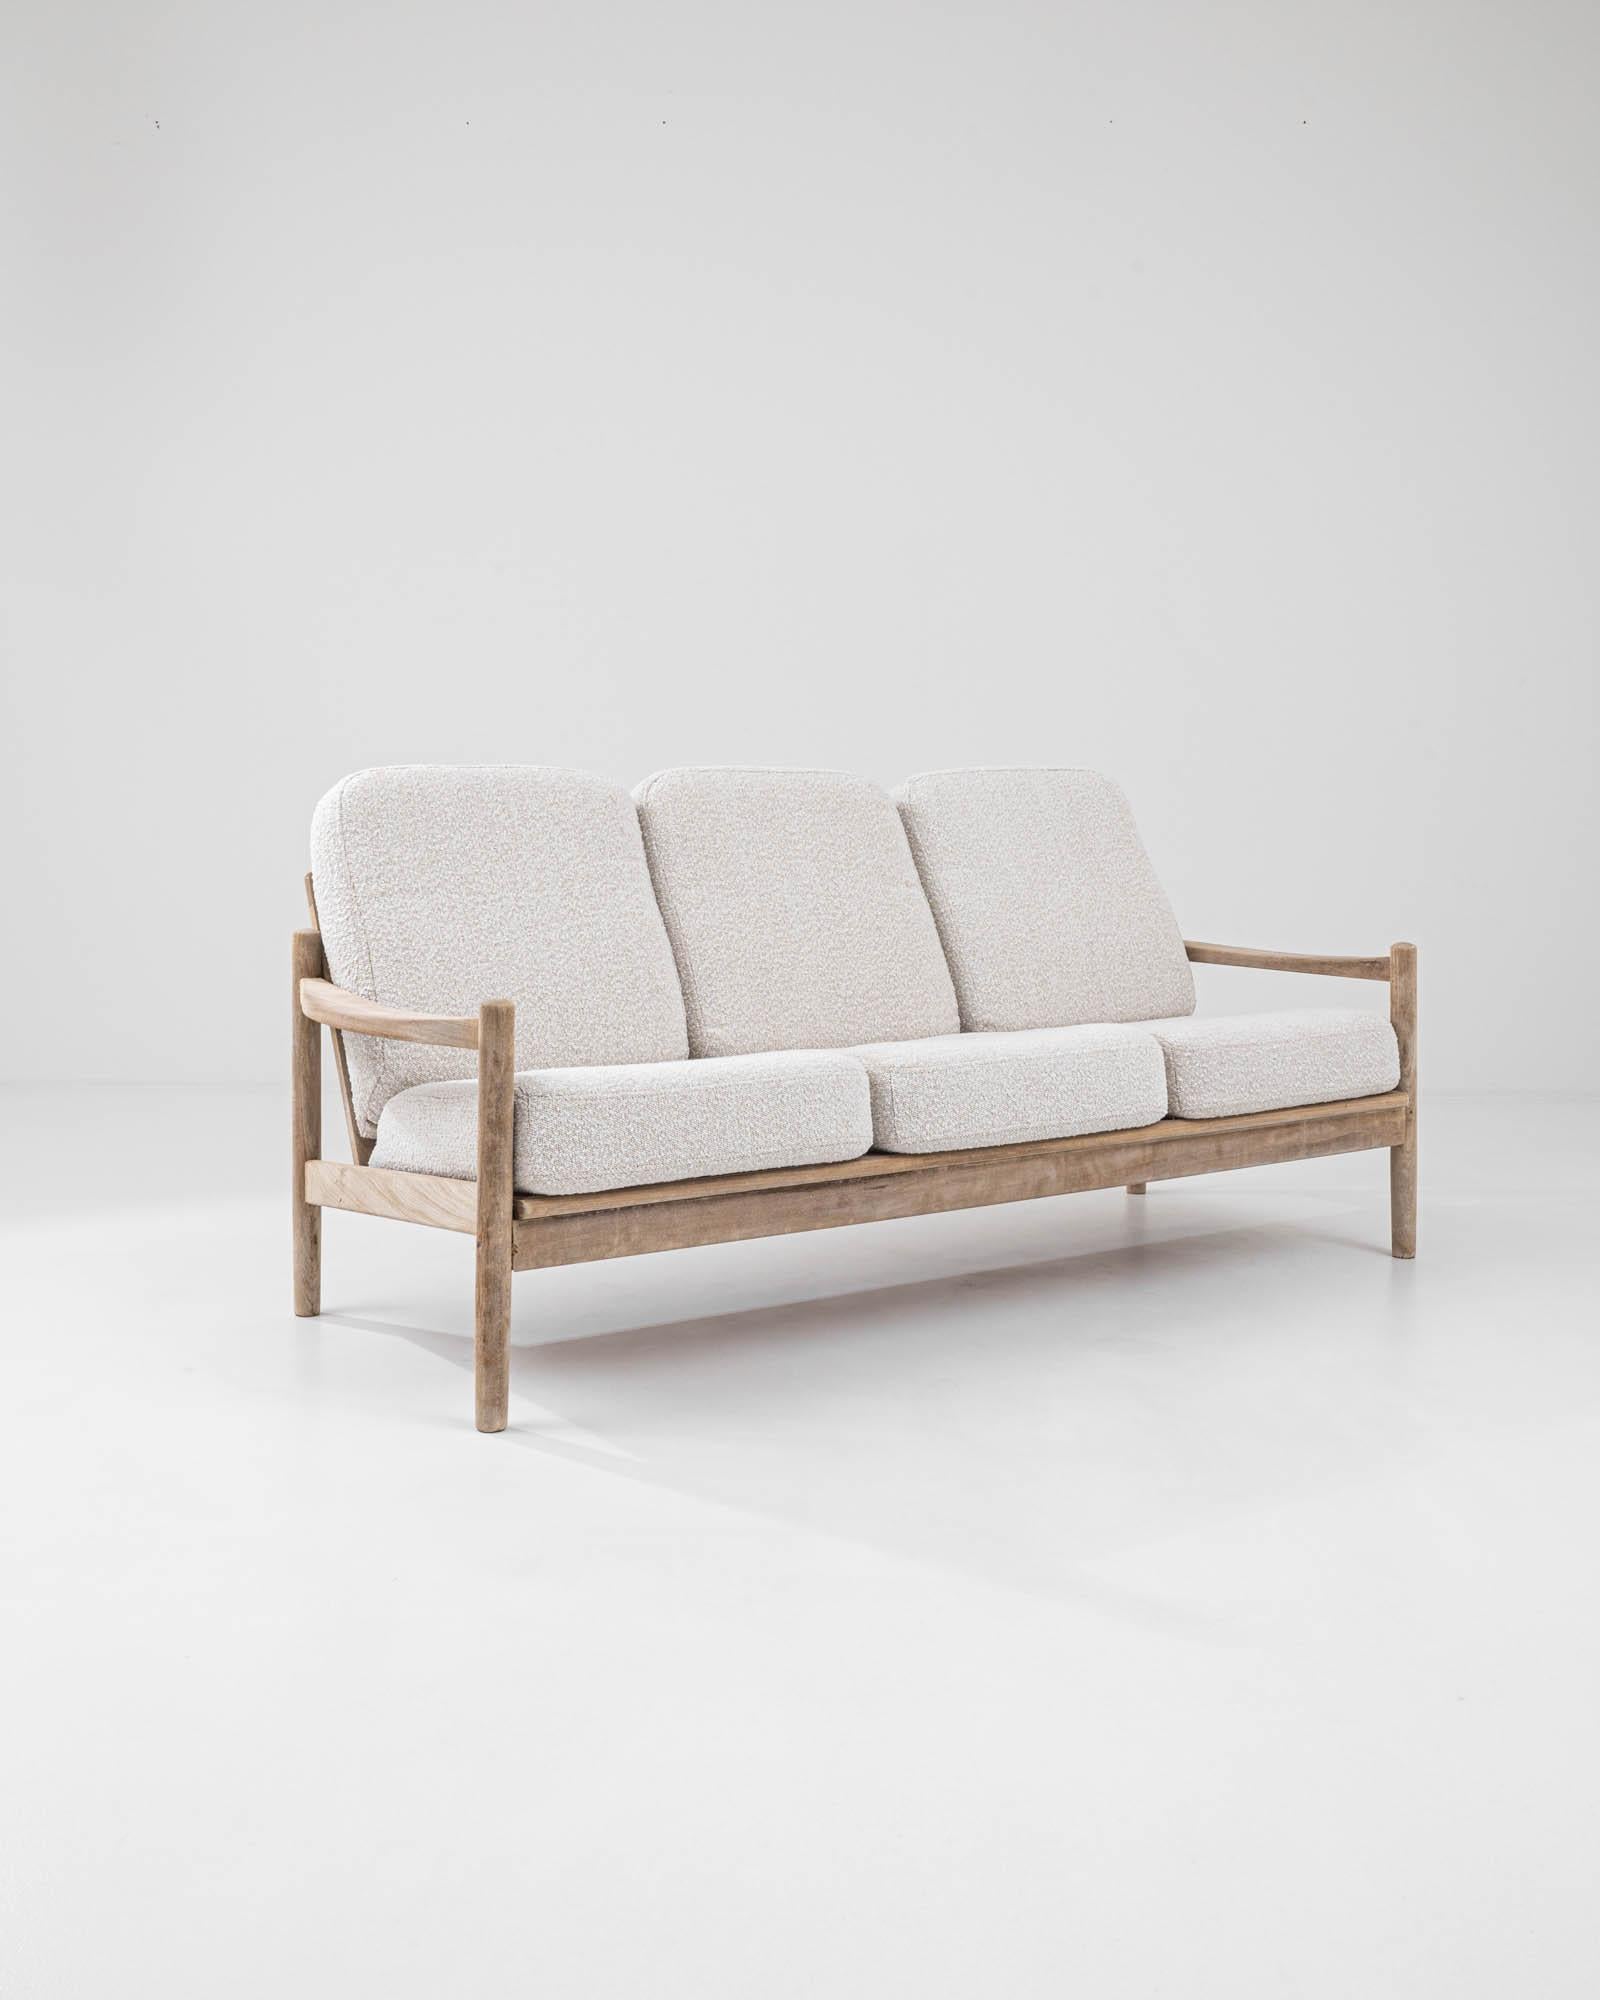 Light and elegant, this vintage wooden sofa epitomizes the homey sophistication of Danish Modern design. Skillfully crafted from fine teak, this mid-century three-seater embodies the essence of the Scandinavian concept of hygge—a feeling of